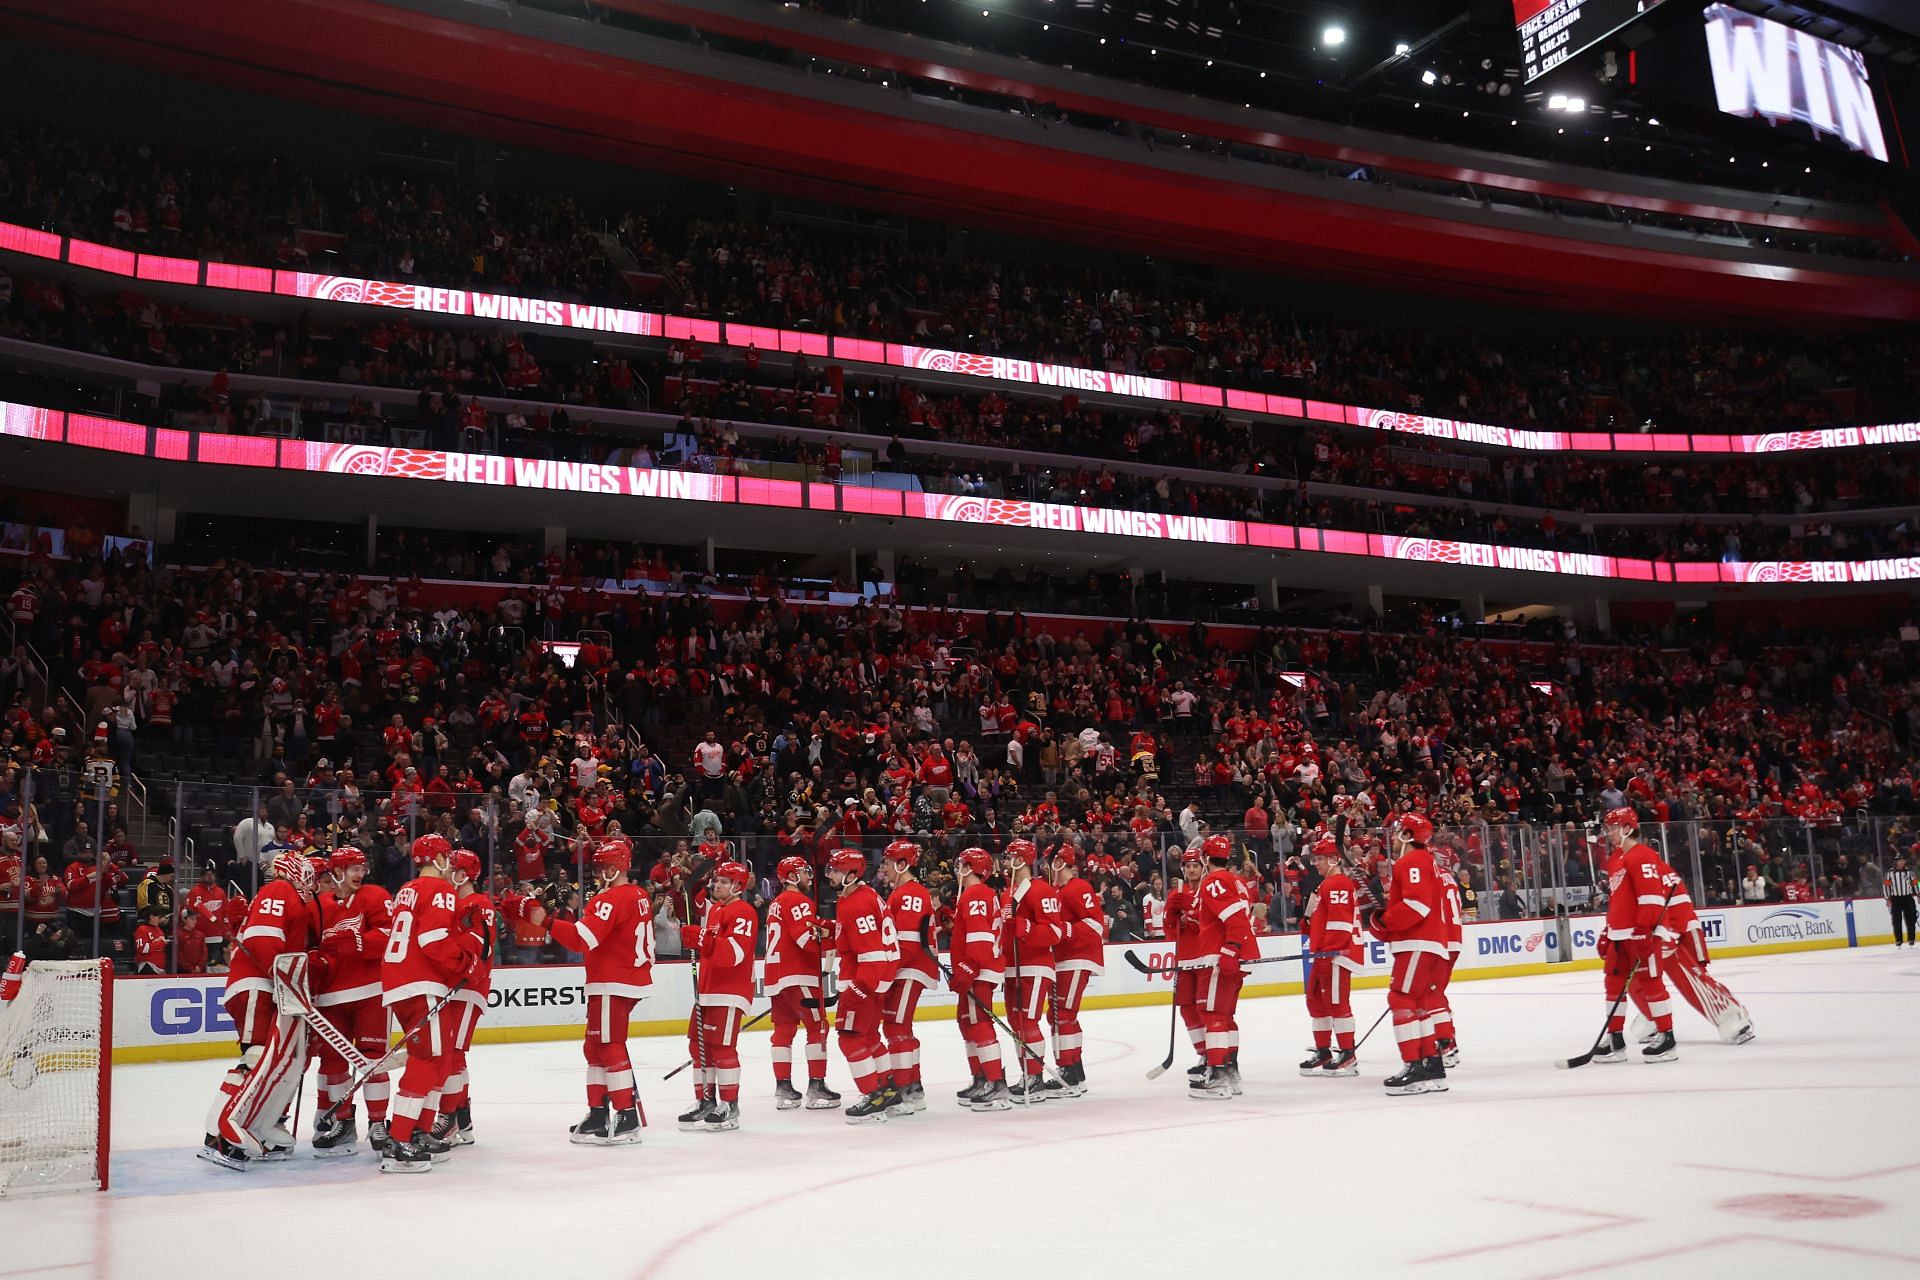 An Early Look at the 2022-23 Detroit Red Wings Roster - Page 2